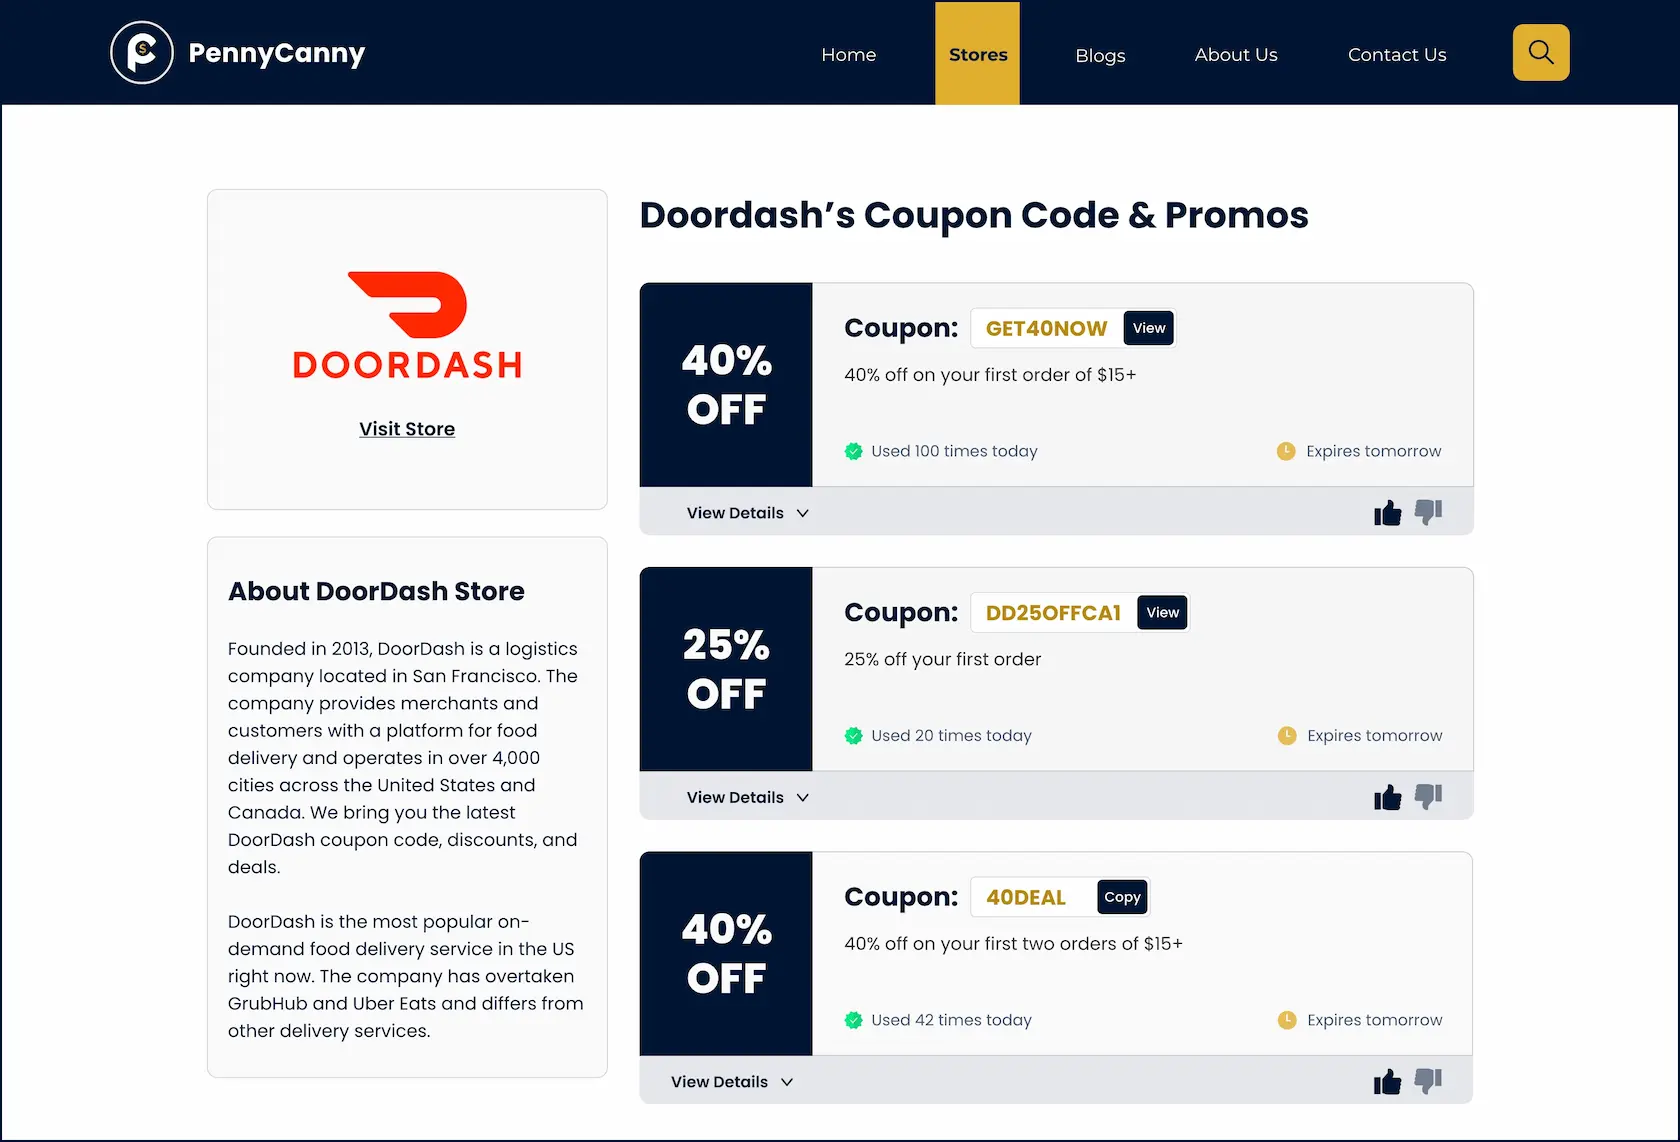 How To Solve DoorDash Promo Code Not Working Issue